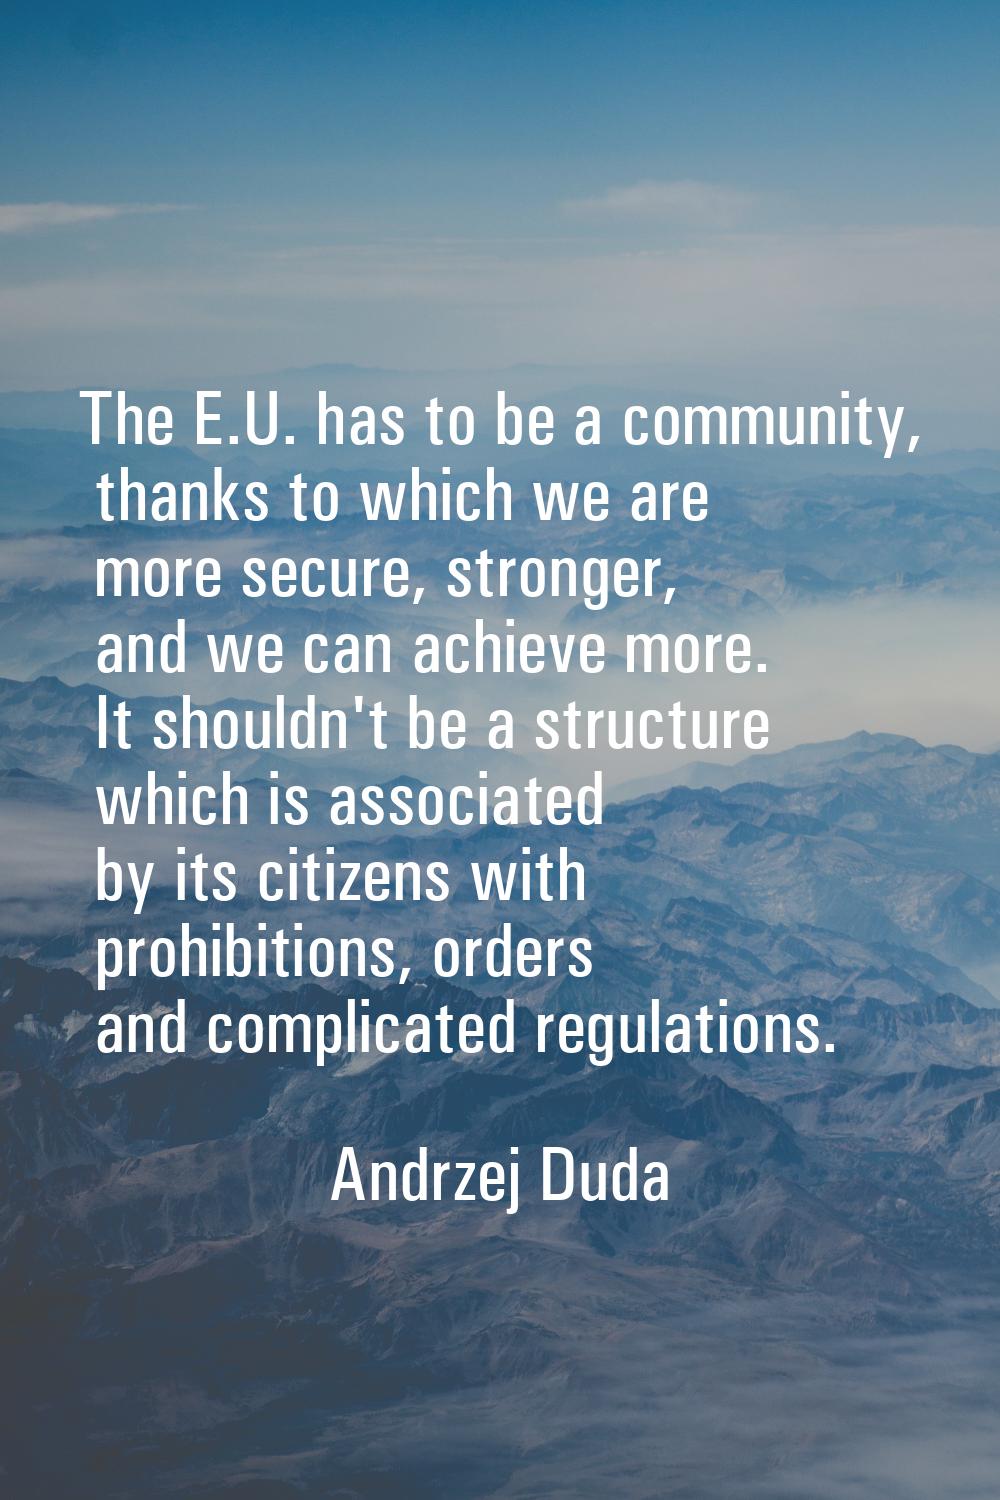 The E.U. has to be a community, thanks to which we are more secure, stronger, and we can achieve mo